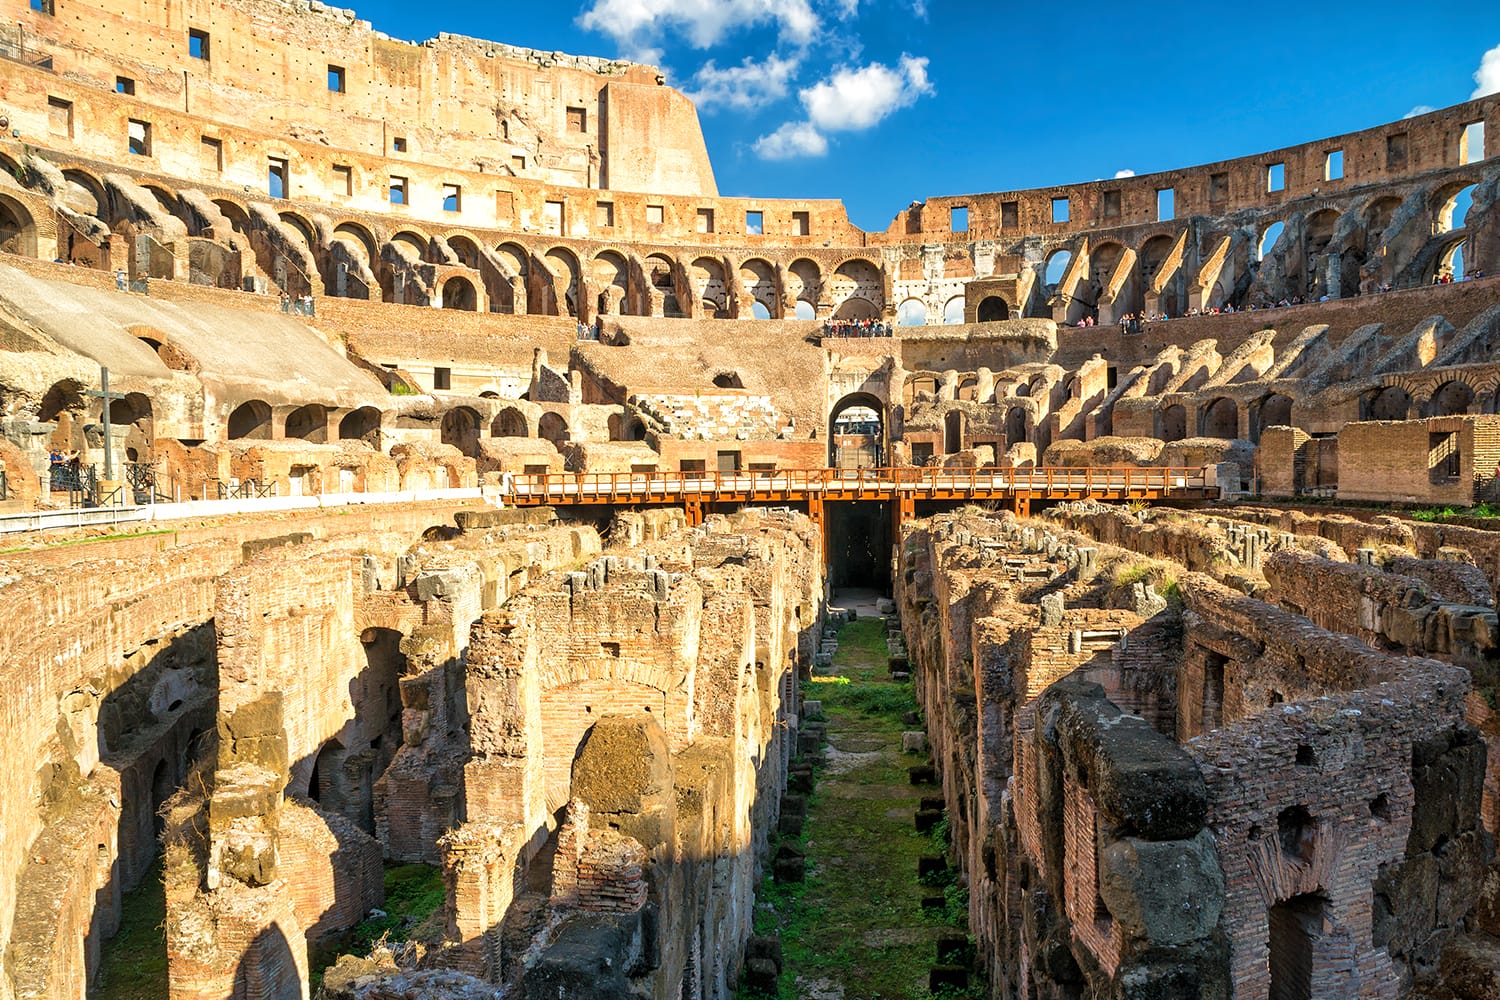 Famous arena of Colosseum (Coliseum) in Rome, Italy.